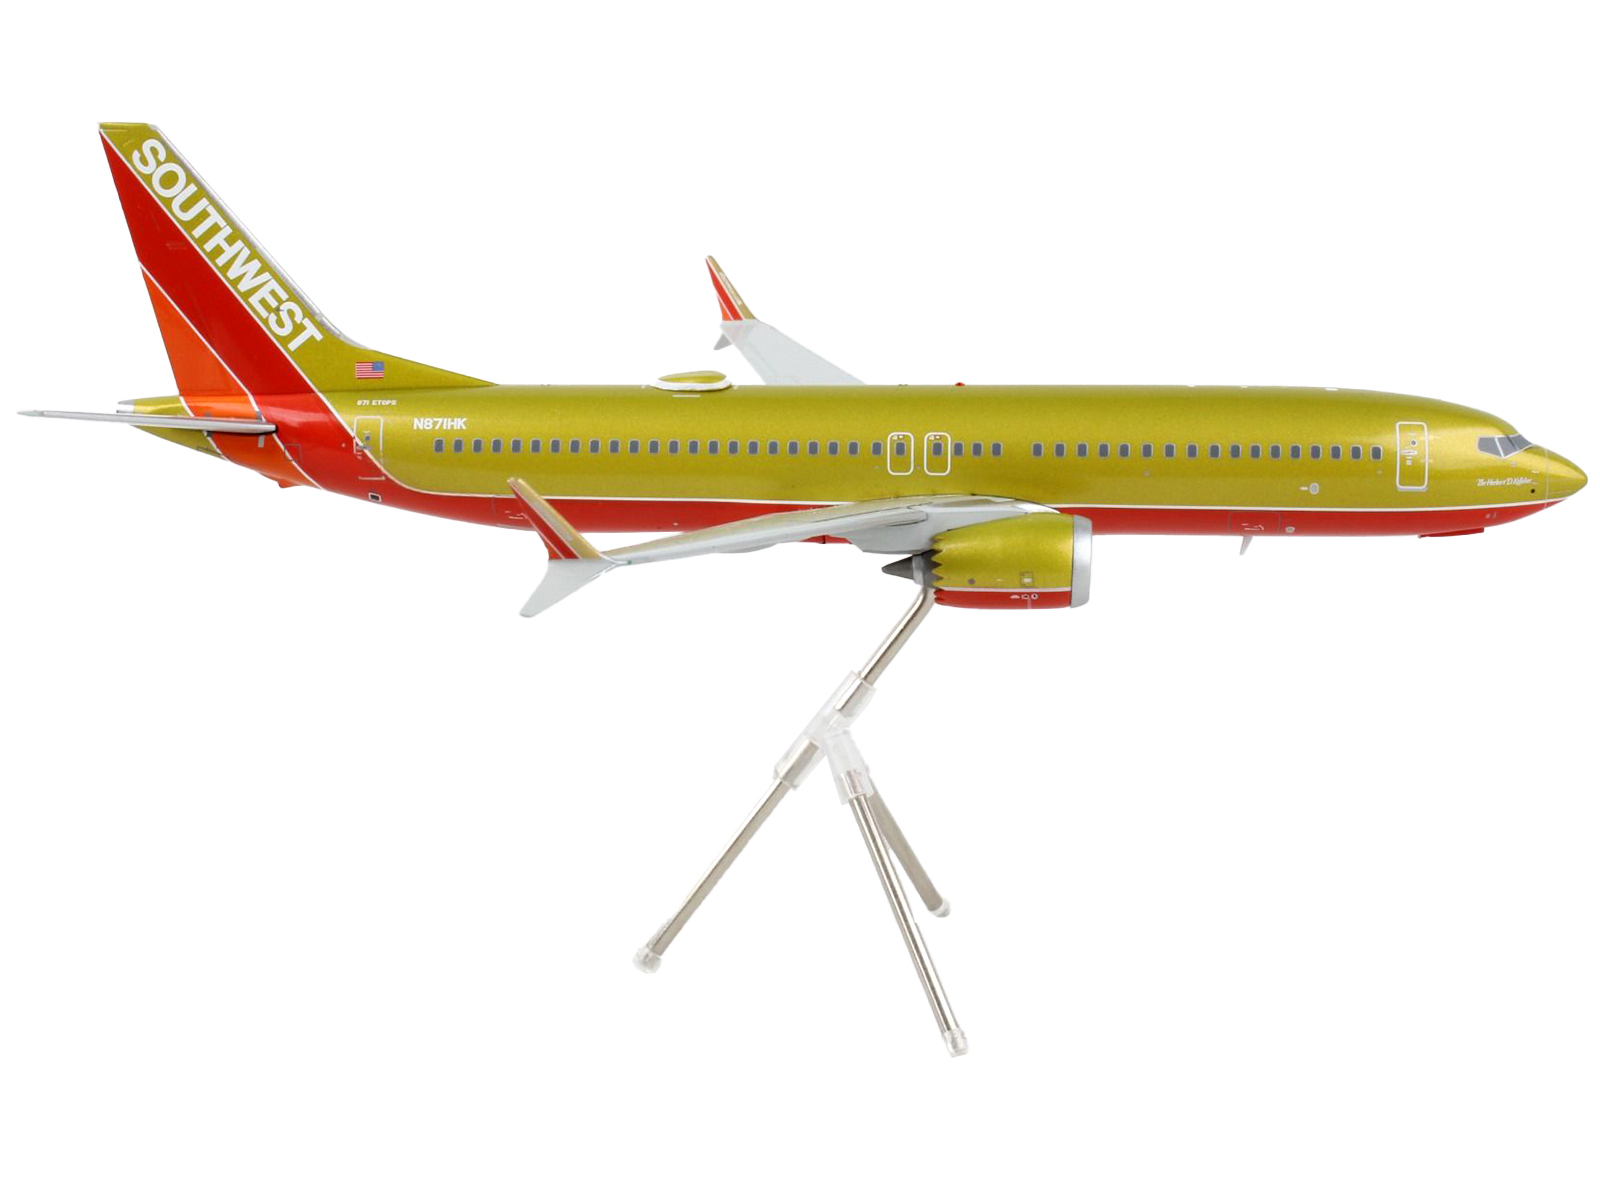 Primary image for Boeing 737 MAX 8 Commercial Aircraft "Southwest Airlines" Gold and Red "Gemin...